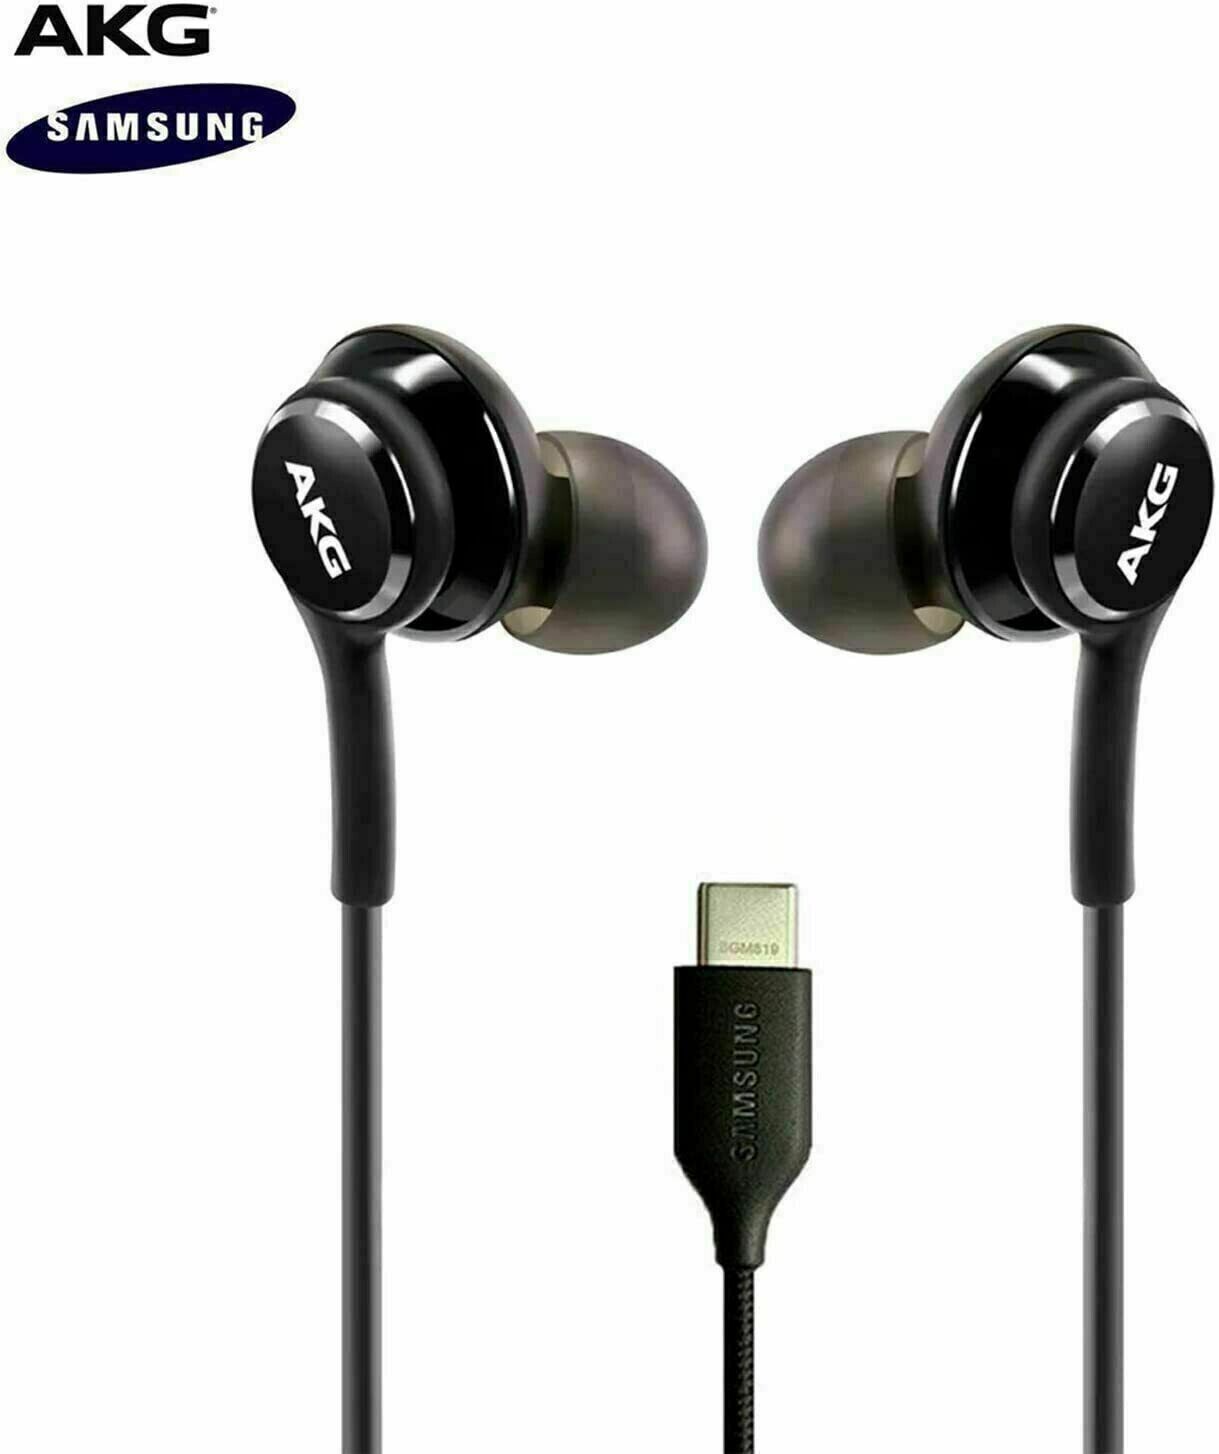 AKG SAMSUNG USB-C Earphones With in-line control For Cell Phones GH59-15106A - $10.39